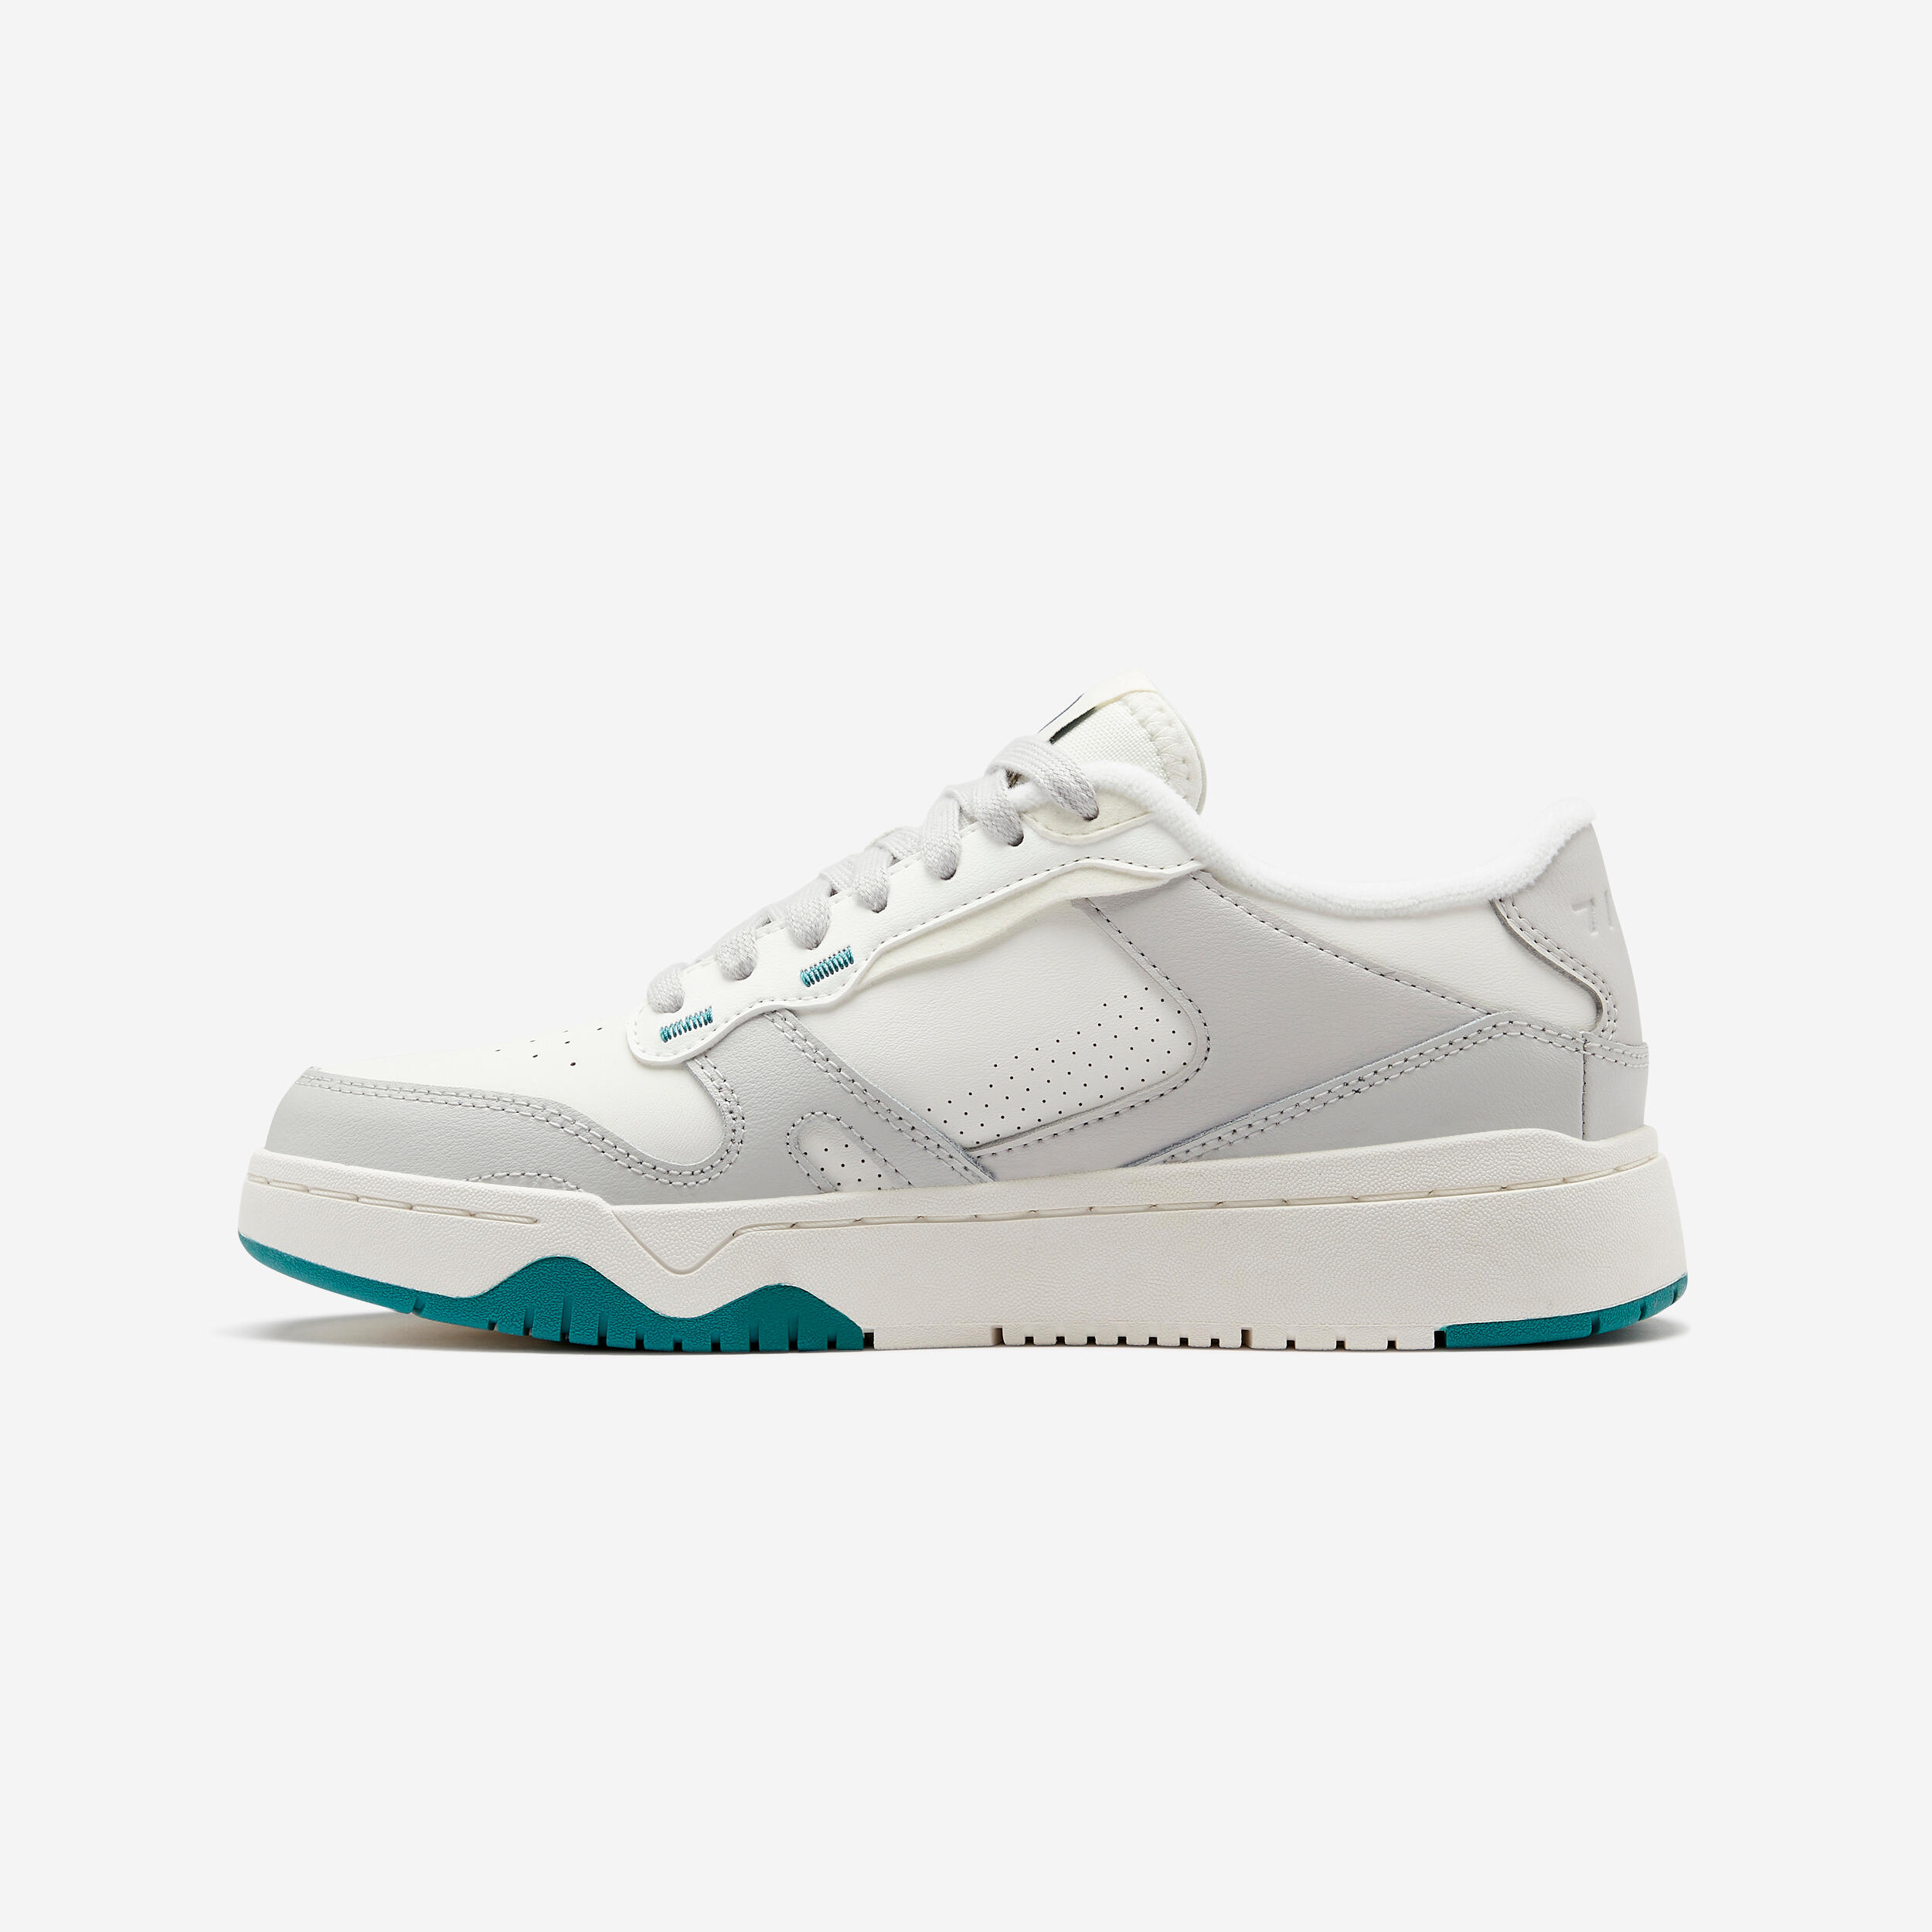 CJ80 Women's Trainers - White and grey 3/7